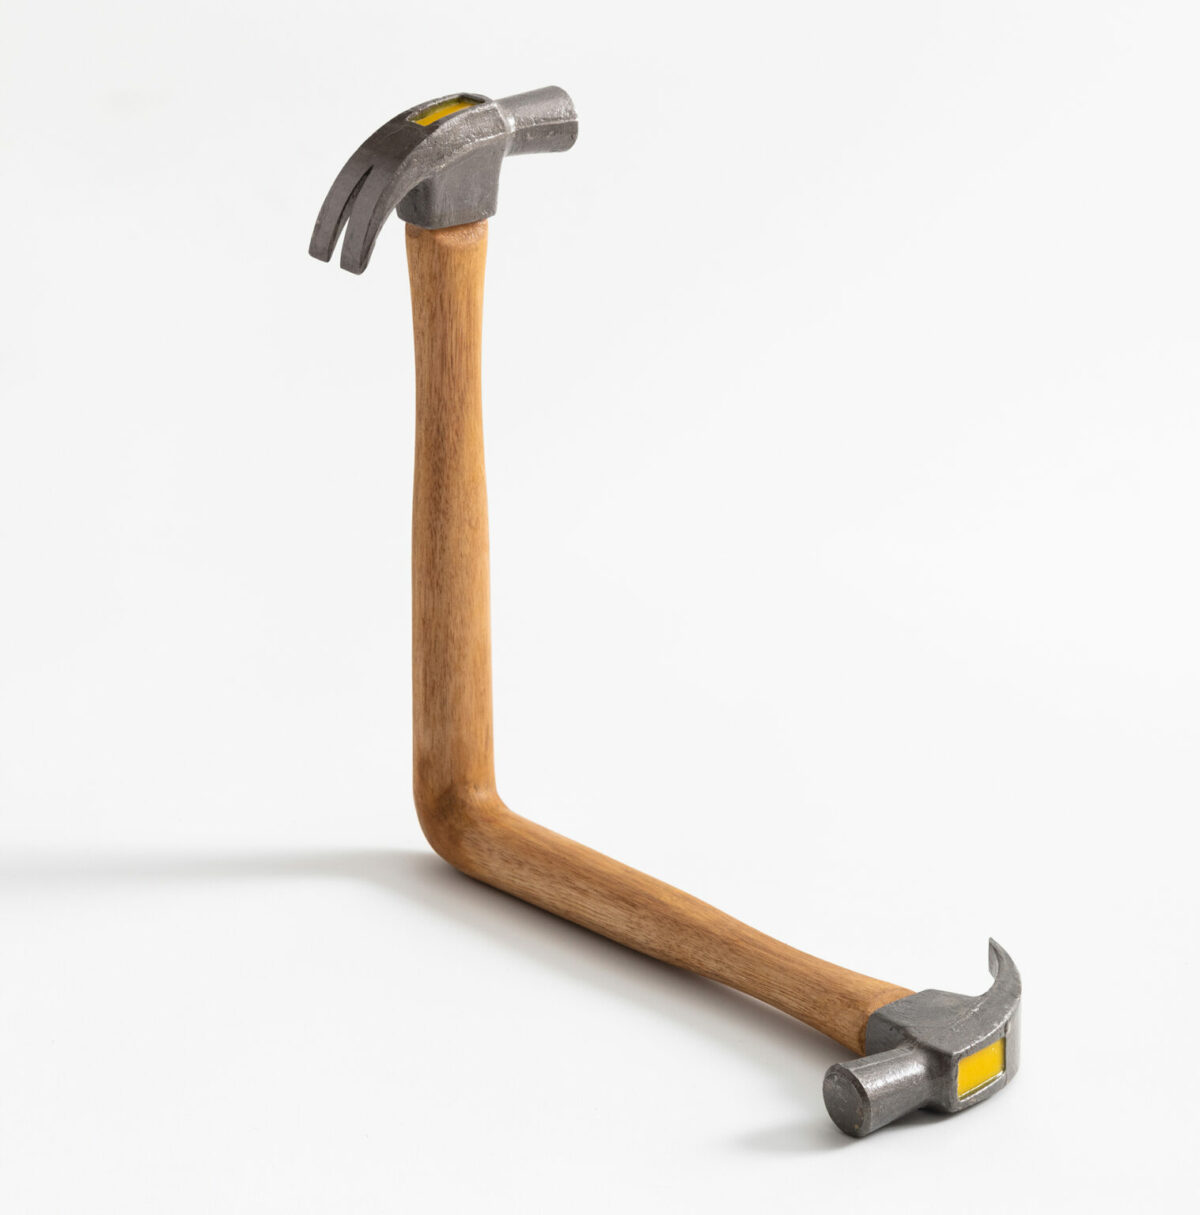 Art And Nature Humorous Wooden Sculptures With Sprouted Wooden Limbs By Camille Kachani 9